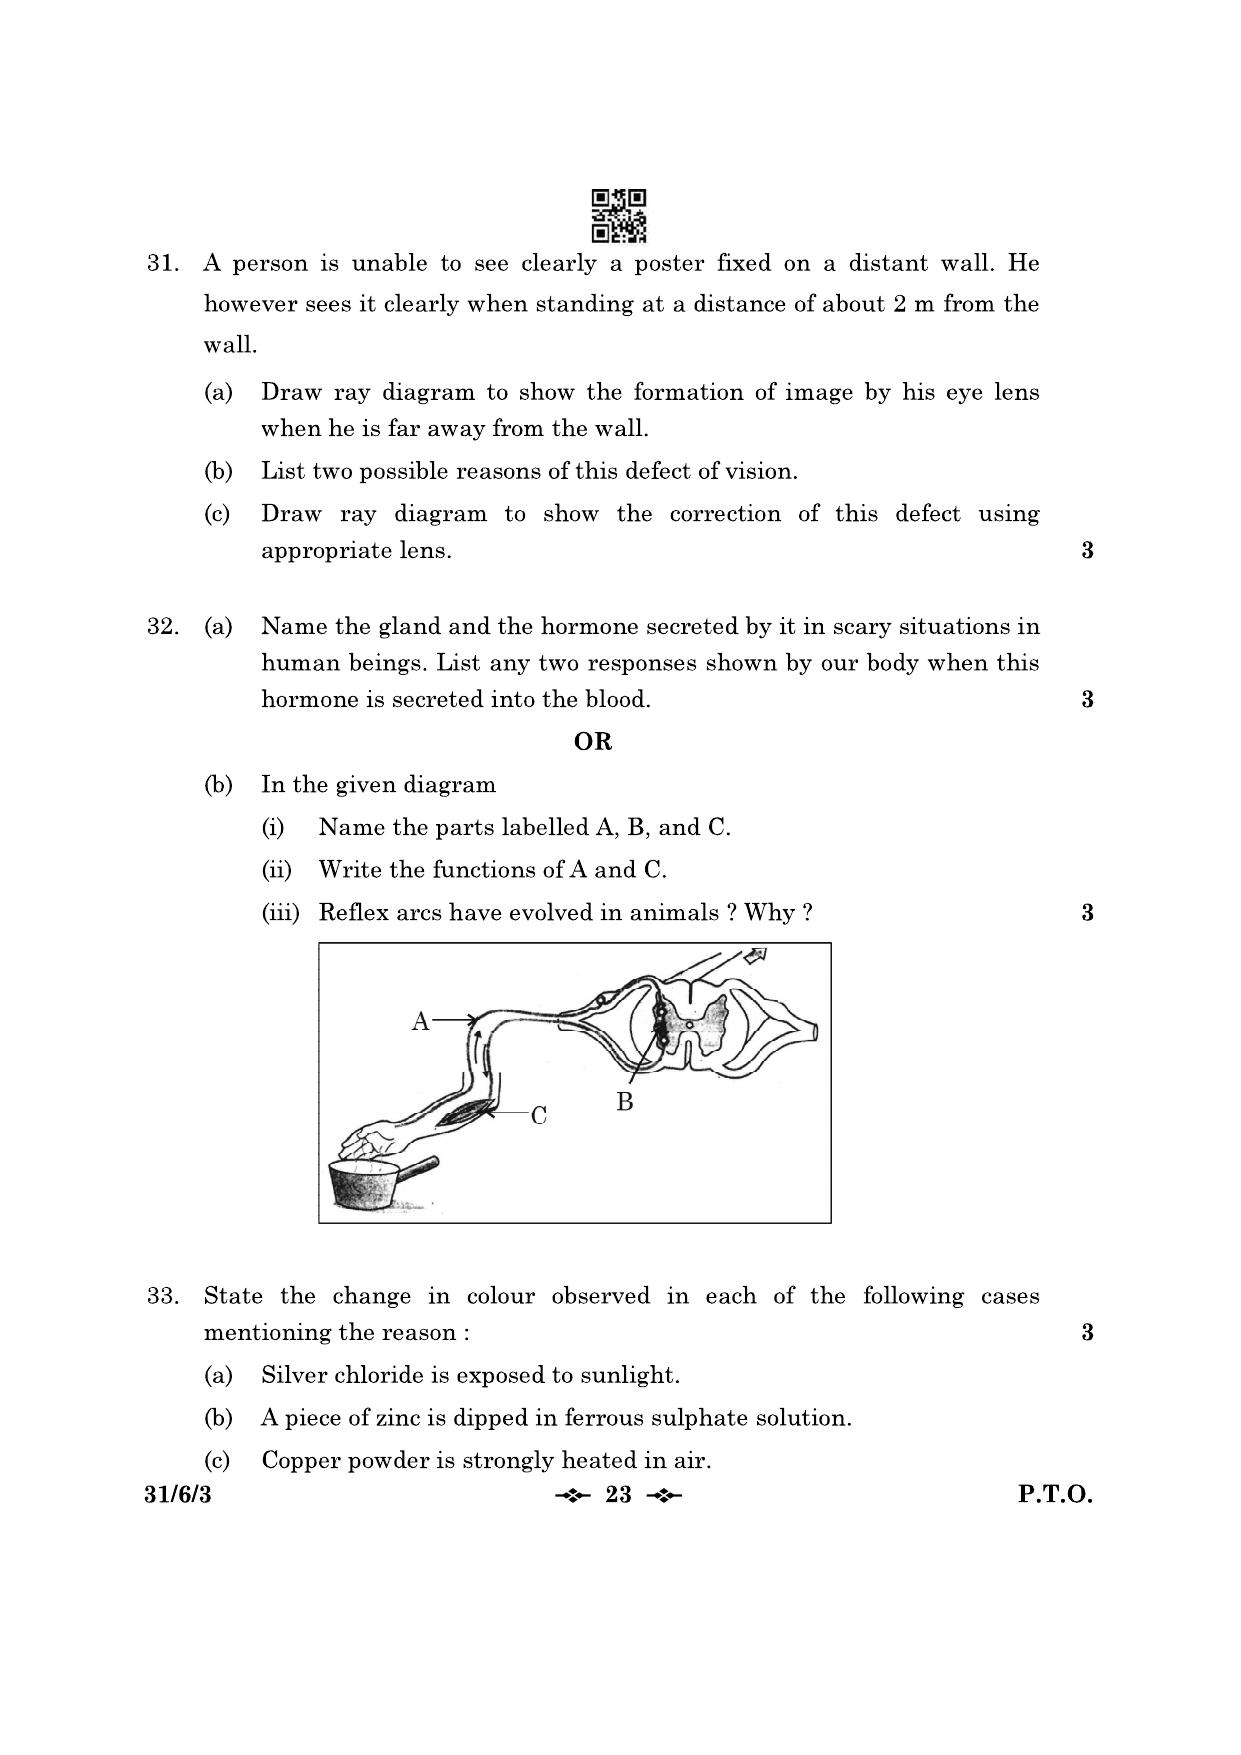 CBSE Class 10 31-6-3 Science 2023 Question Paper - Page 23